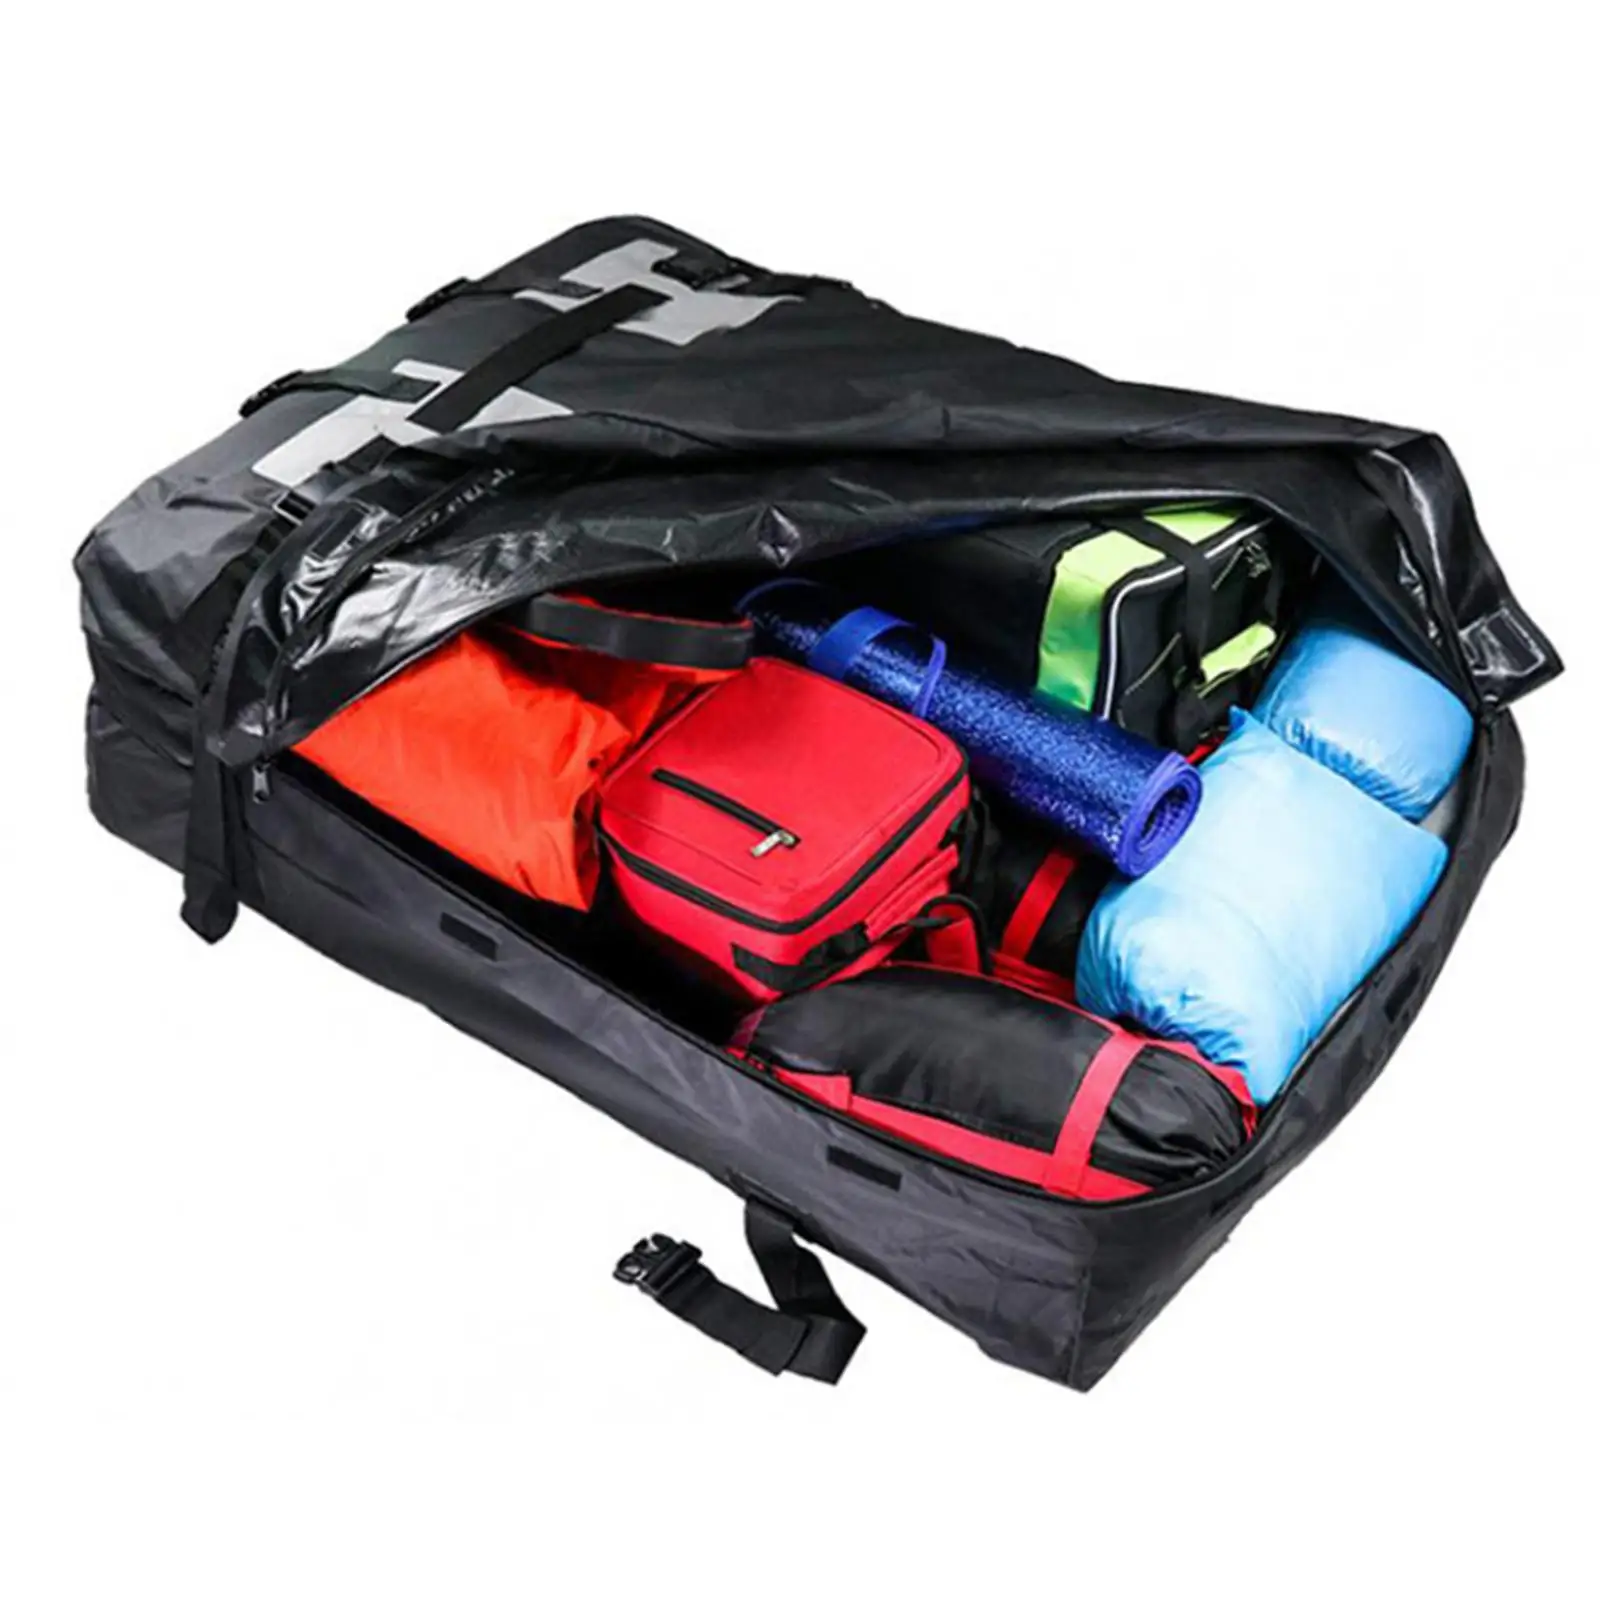 15 Cubic Feet Car Rooftop Bag Auto Roof Luggage Bag Waterproof Carrier Bag Waterproof Rooftop Cargo Carrier Bag for SUV Cars